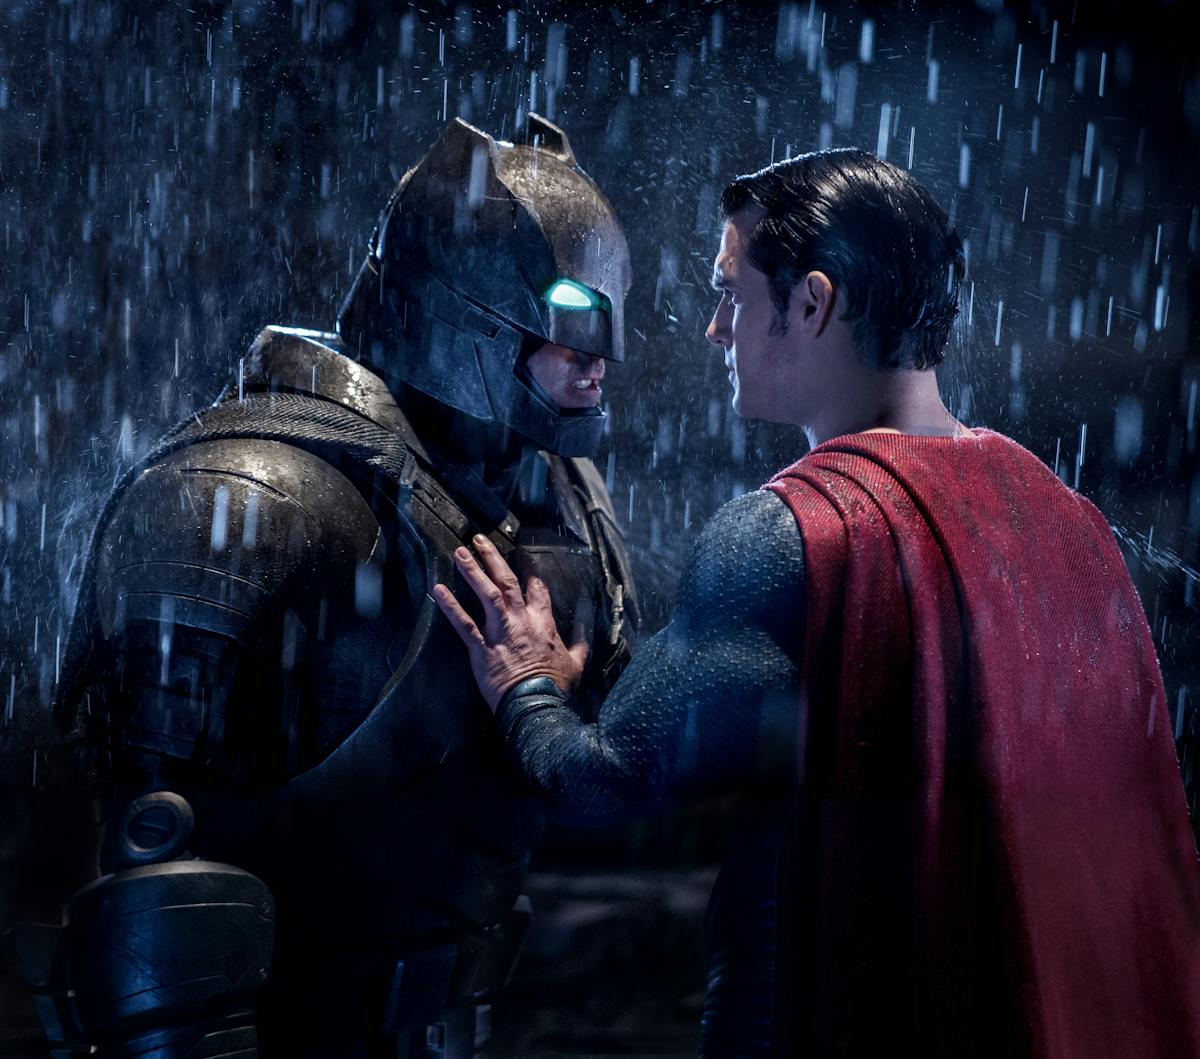 Batman v Superman: Dawn of Justice is a po-faced exercise in  franchise-building